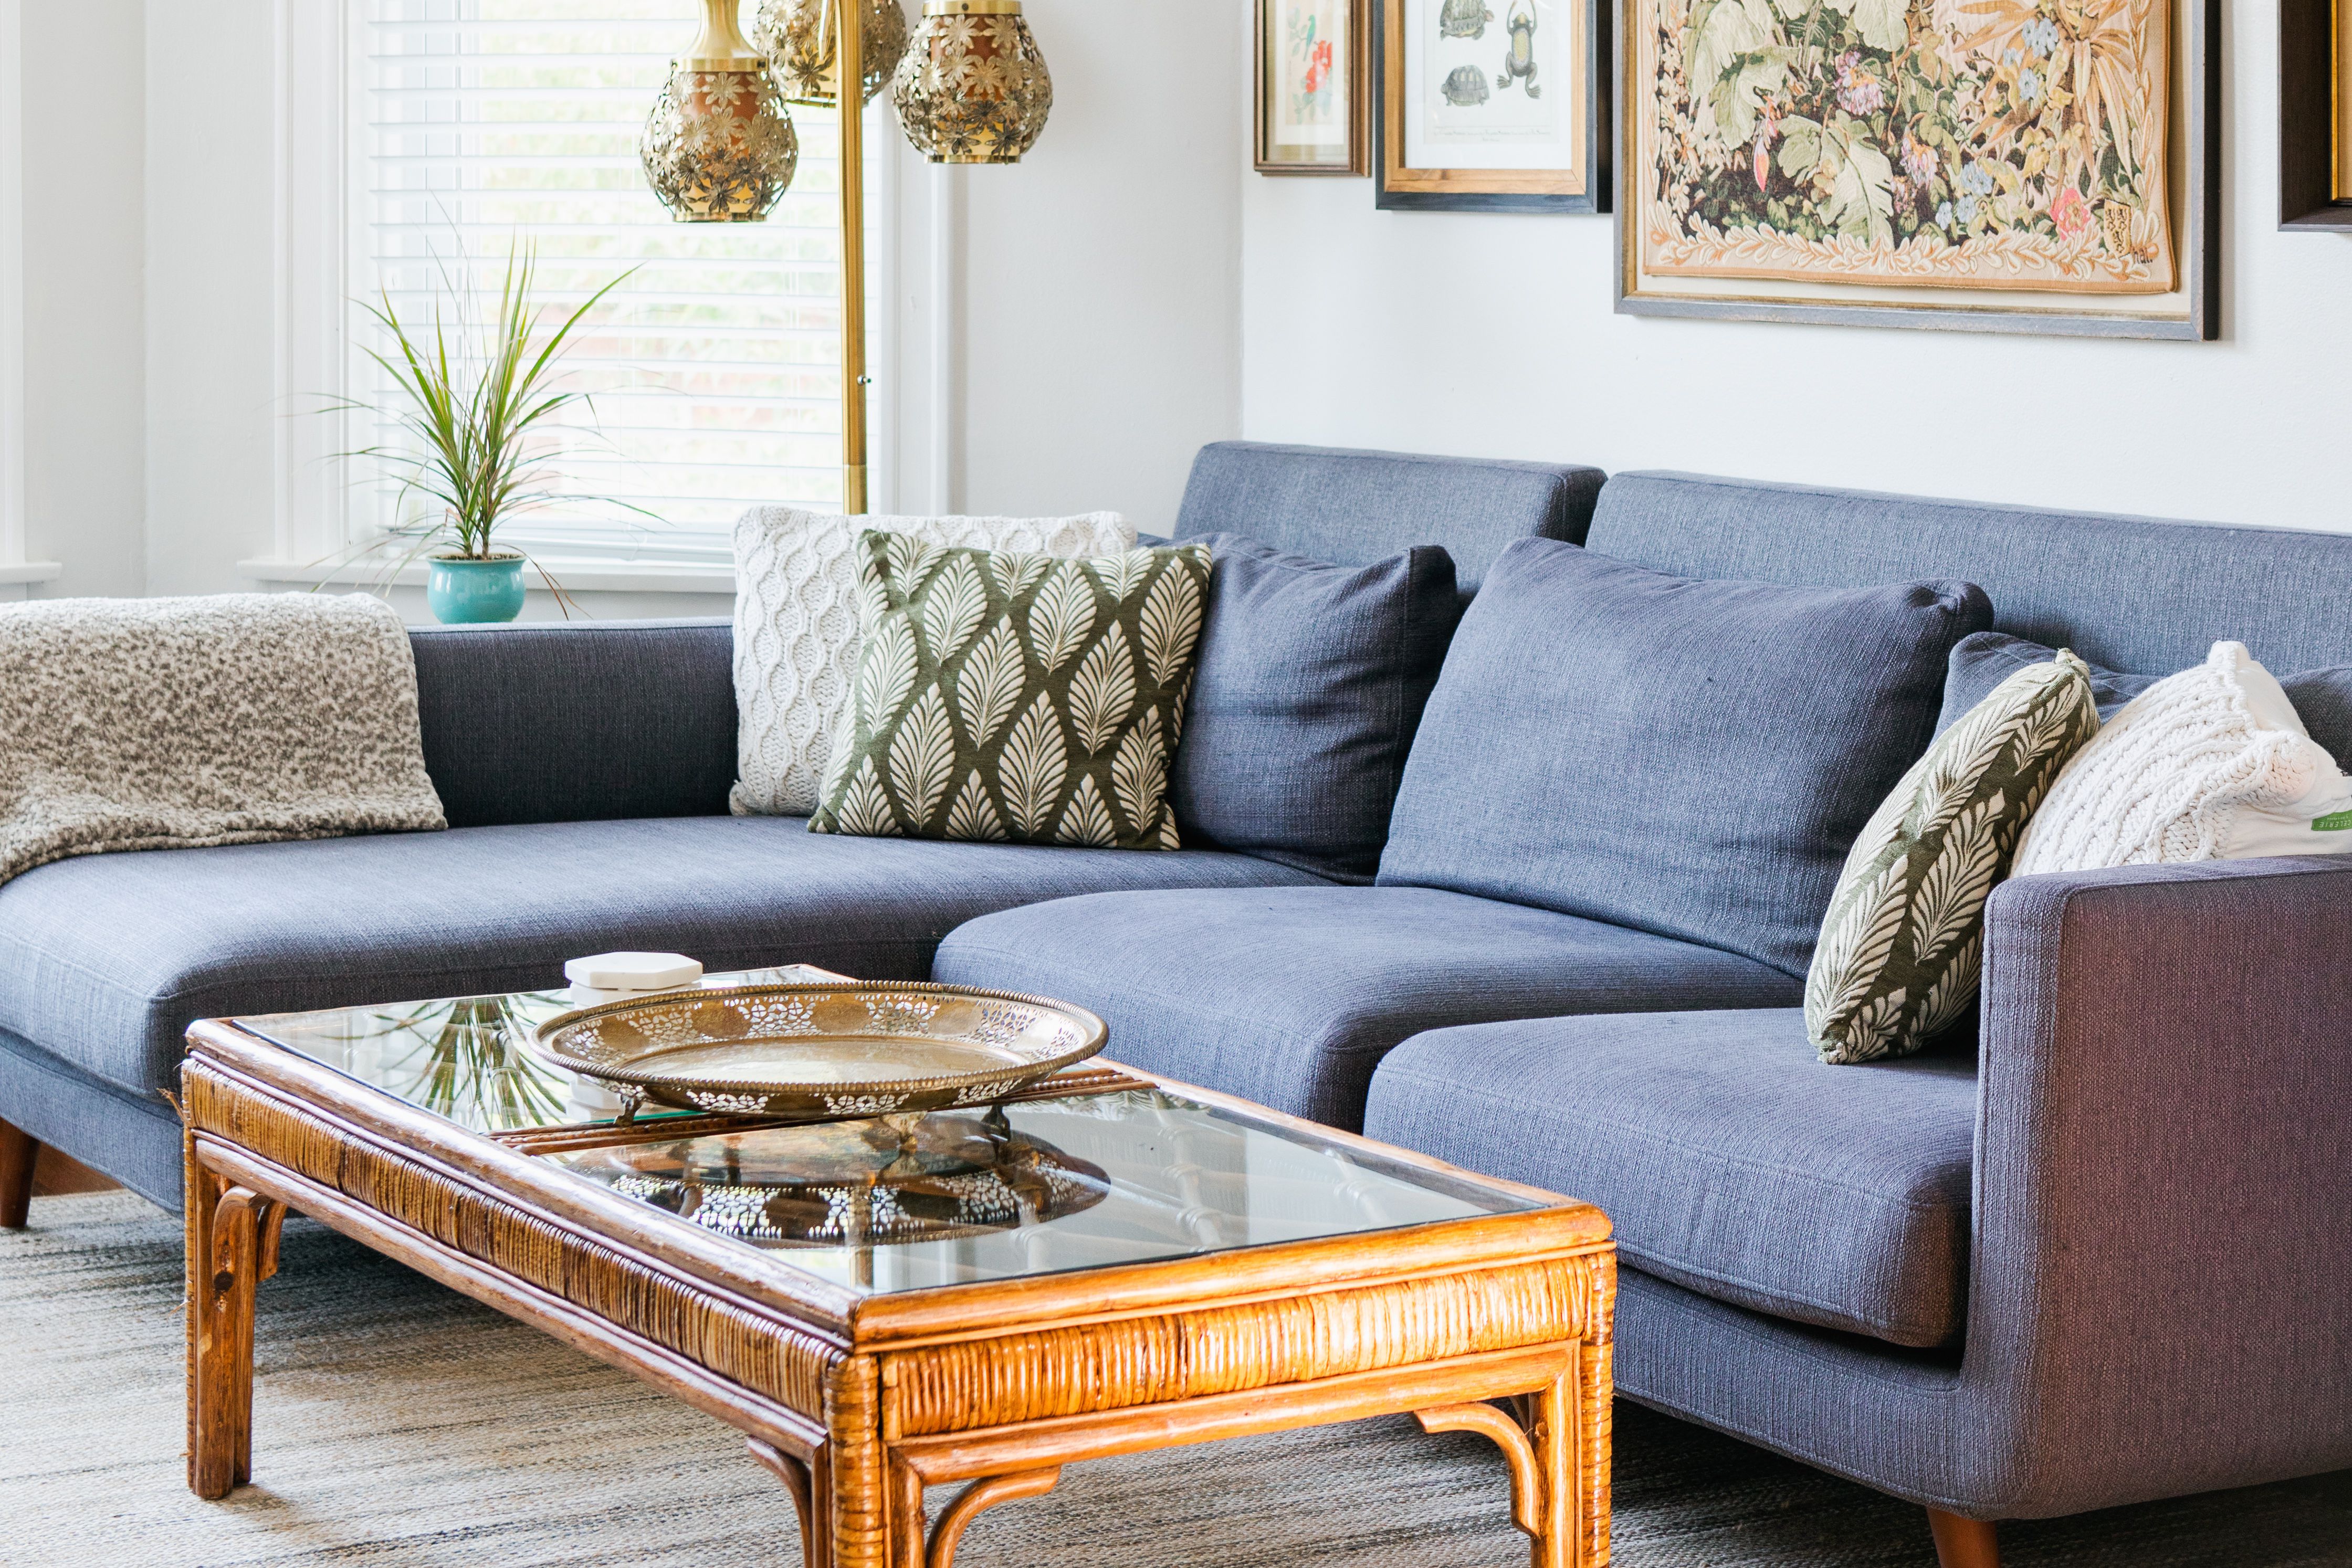 These 70s Decor Trends Are Back in Style